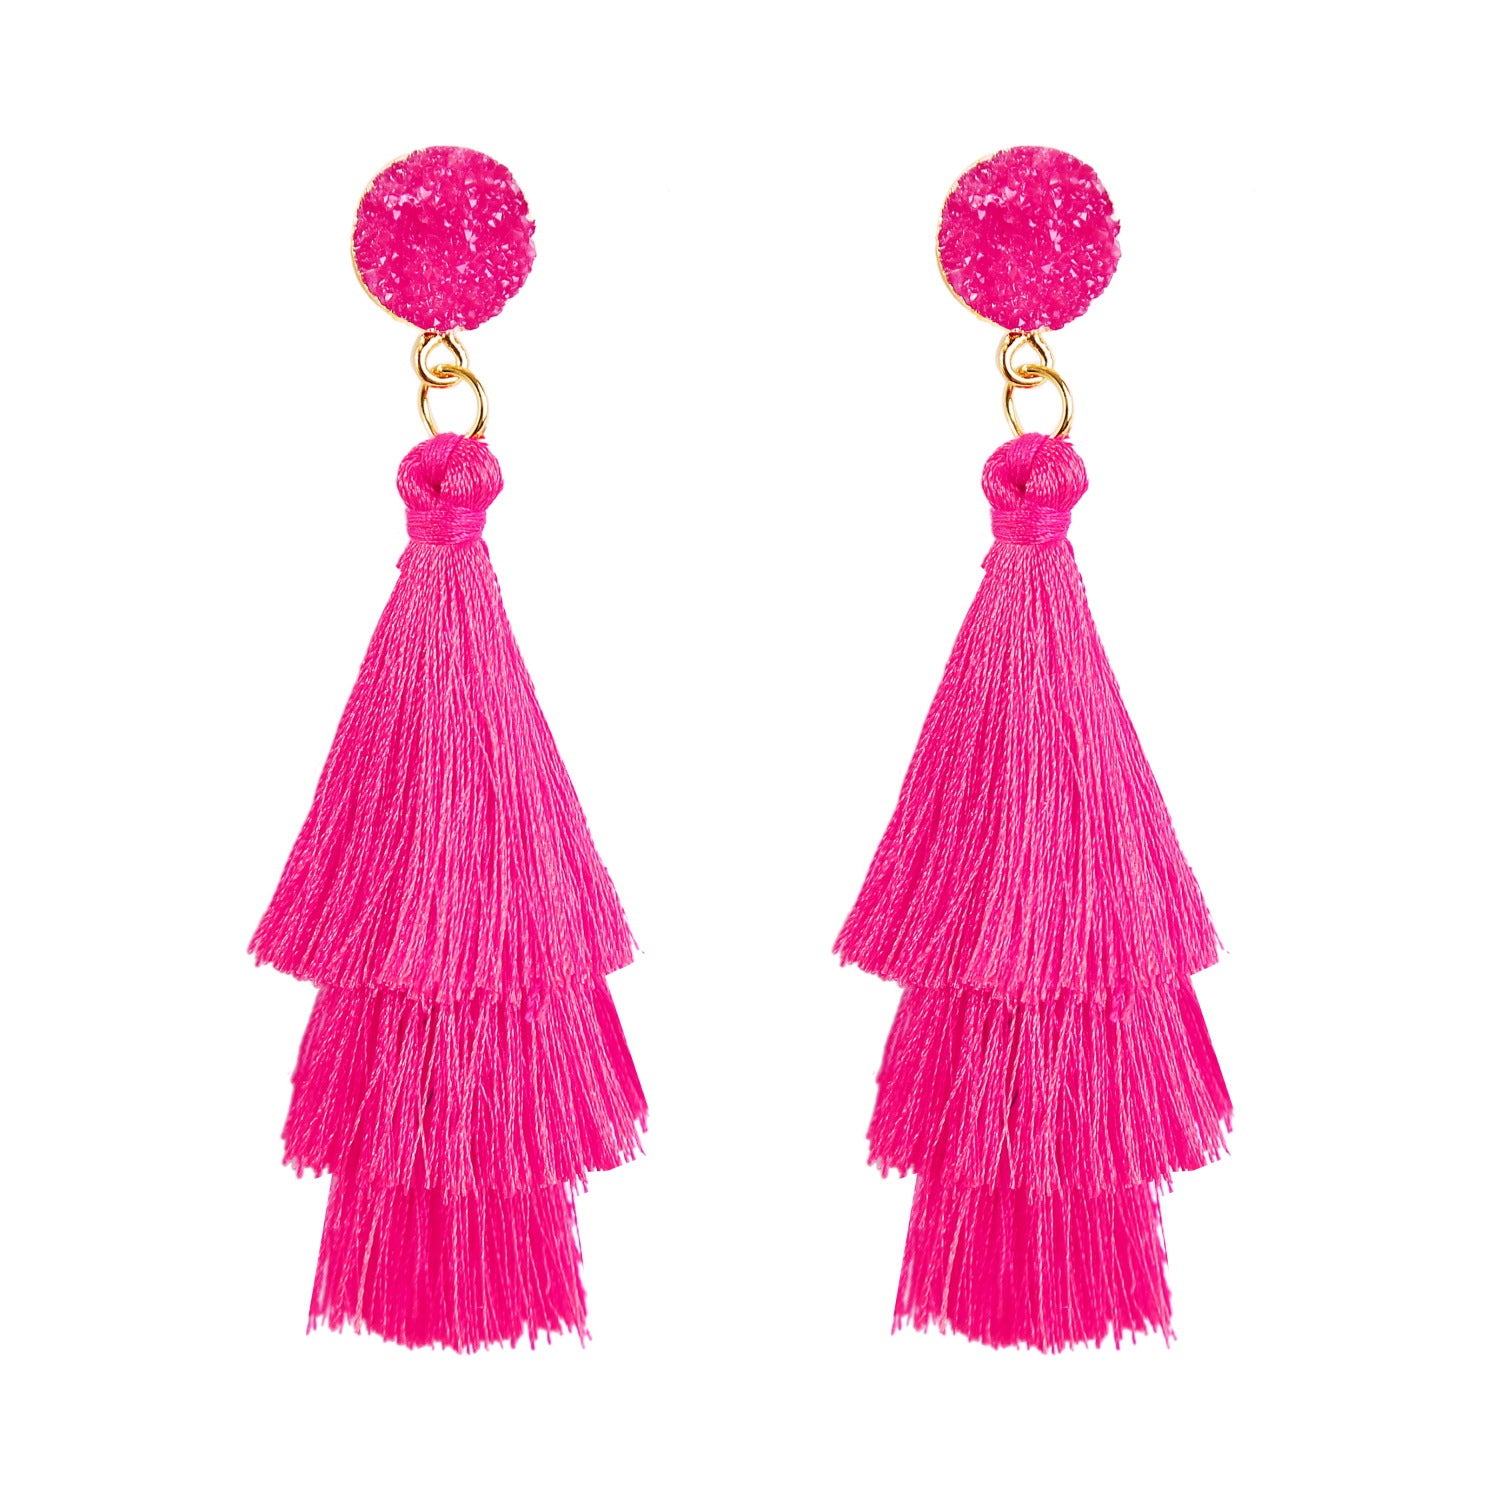 Colorful Layered Fashion Tassel Earrings Bohemian 3 Tier Fringe Statement Big Dangle Drop Earrings for Women Teen Girls Party Vacation Birthday Everyday Jewelry Gift Druzy Stud Post